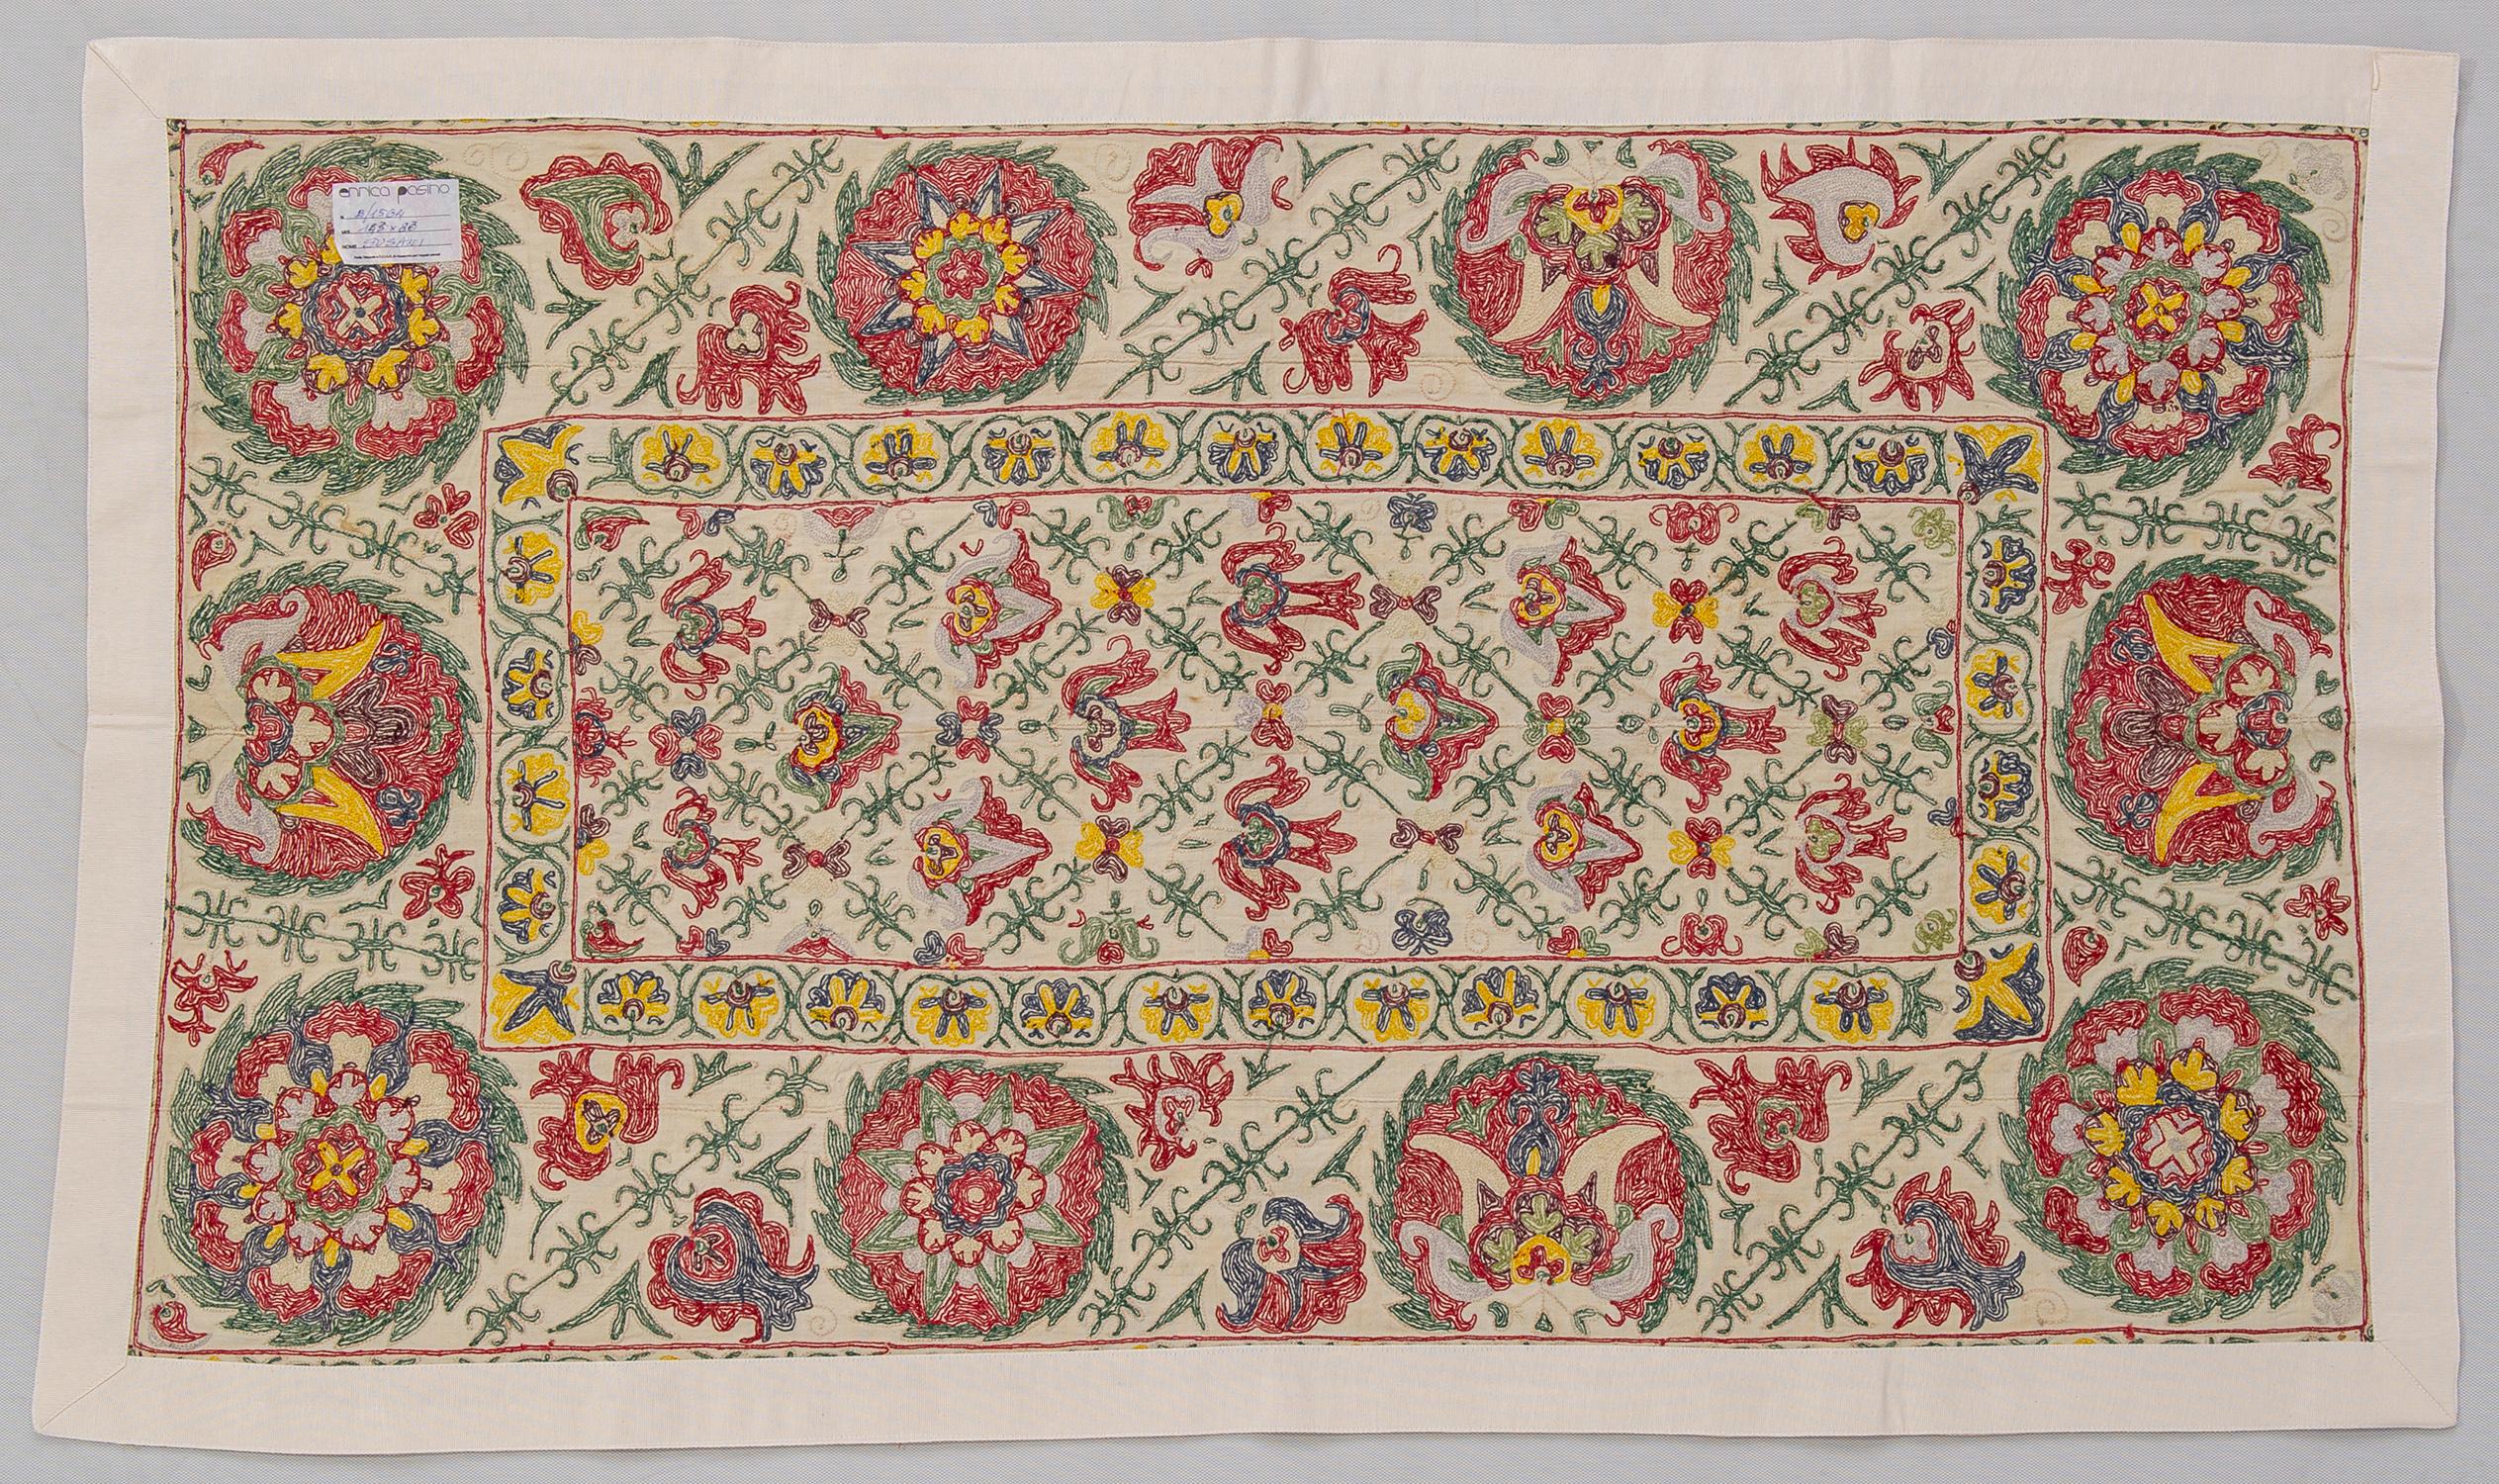 Beaux Arts Suzani Turkoman Embroidery in Little Size For Sale